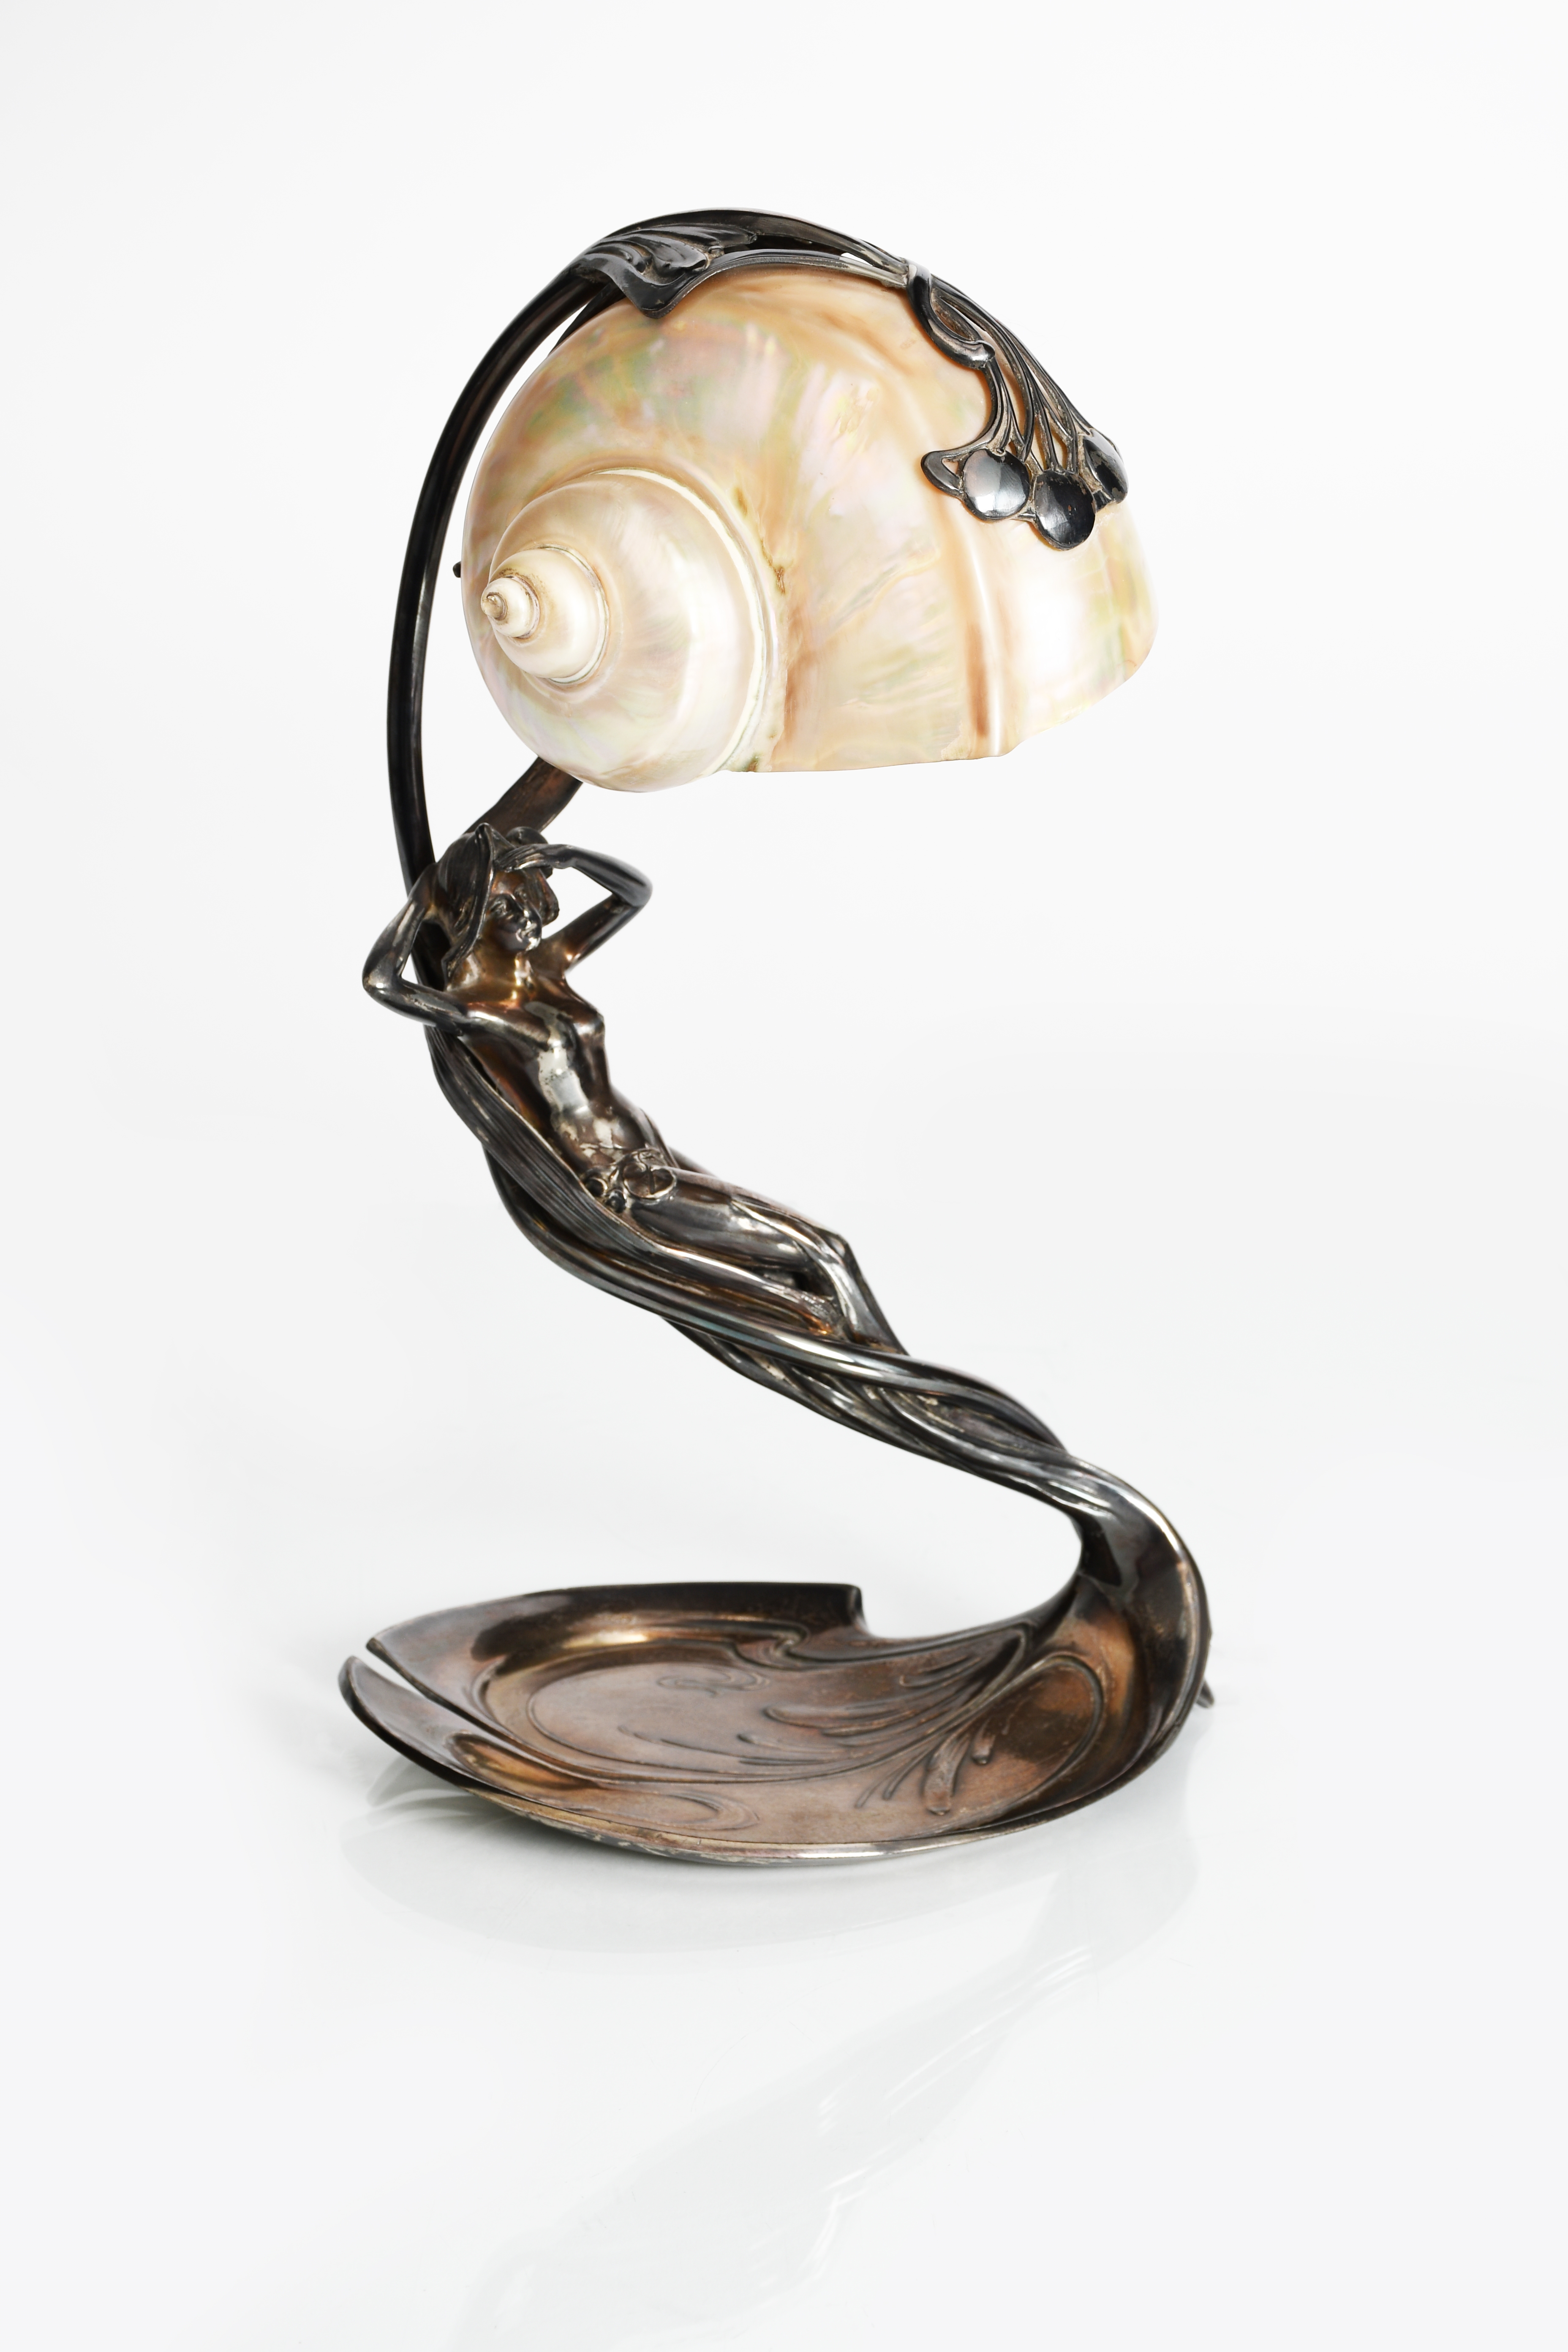 Explosieven Hangen lading Moritz Hacker | an Art Nouveau electroplated figural table lamp with  nautilus shell shade (1995) | MutualArt